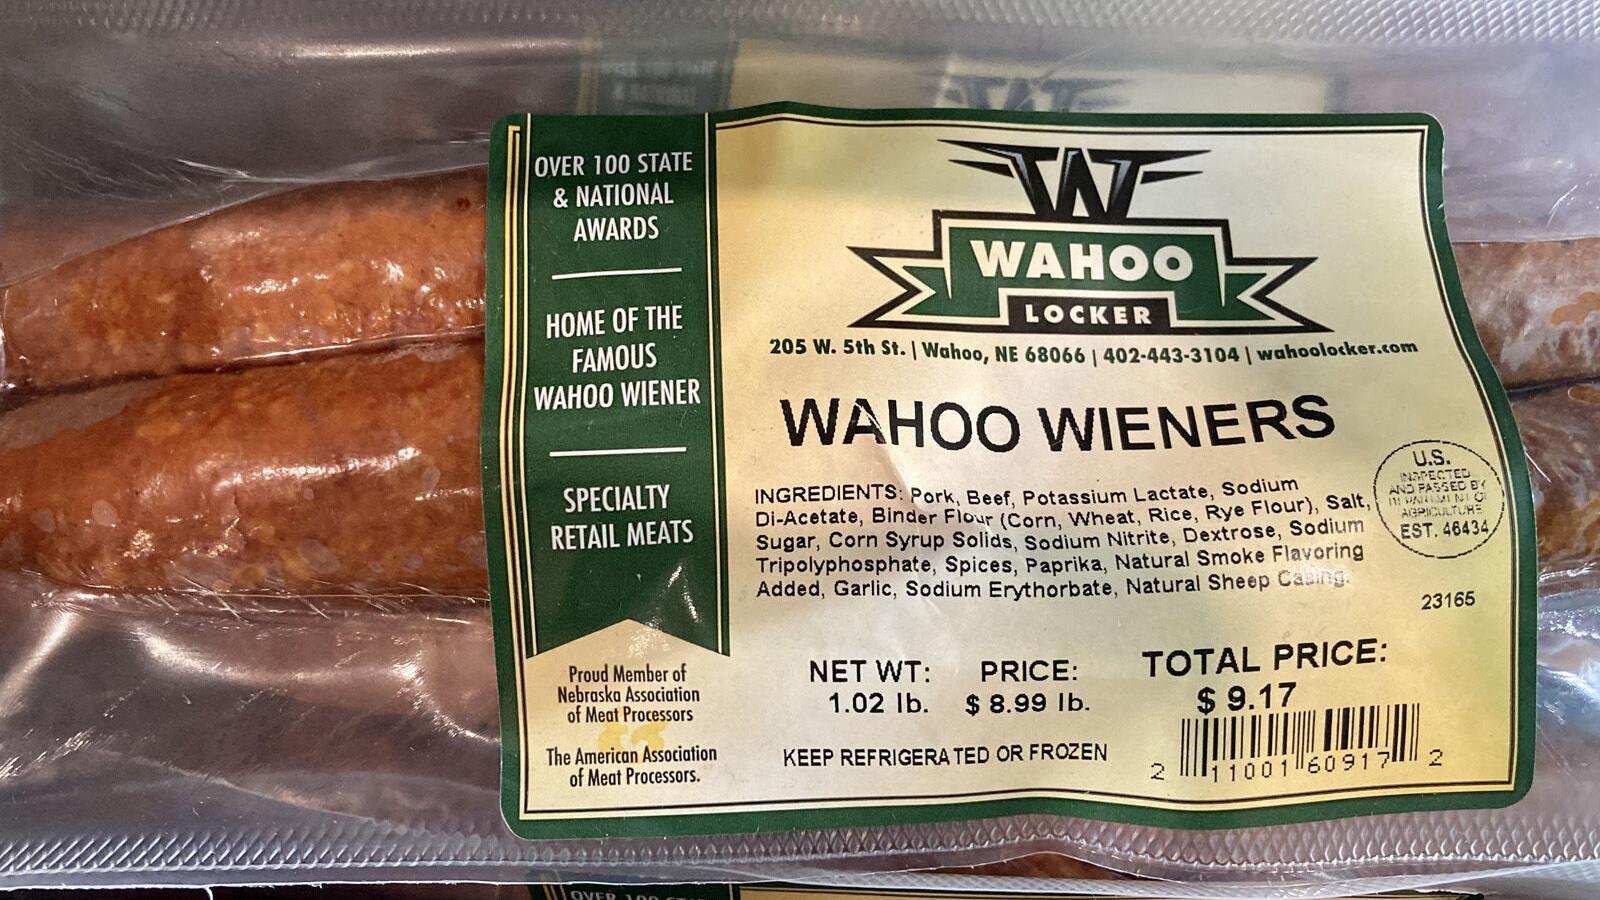 A cut above: Award-winning meat products from Wahoo Locker now available in Grand island